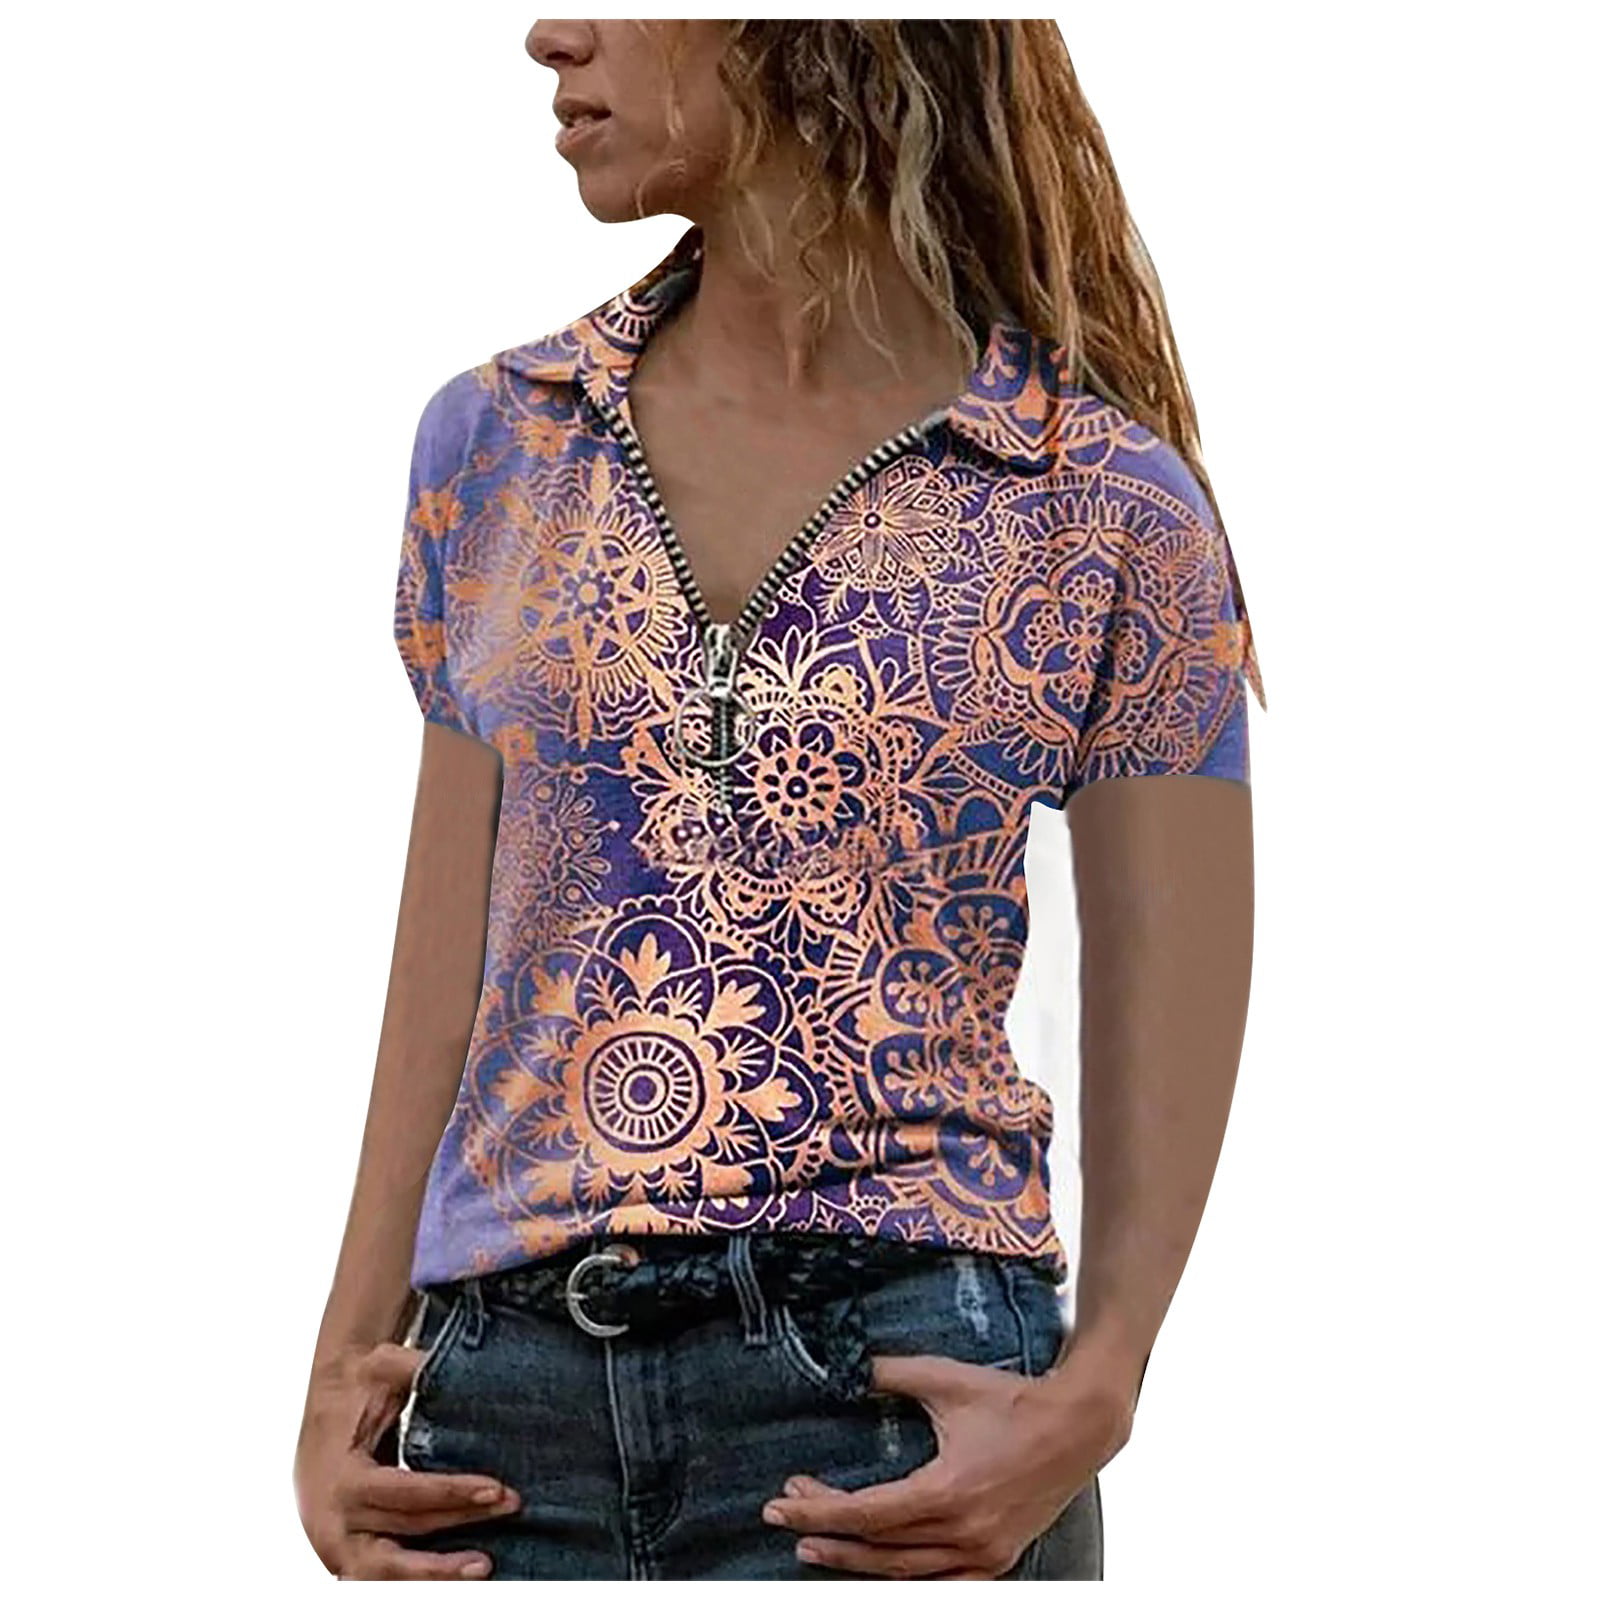 Inkach Womens Summer Short Sleeve T-Shirt ❤️ Plus Size ❤️ Cold Shoulder Lace V-Neck Blouses Tops